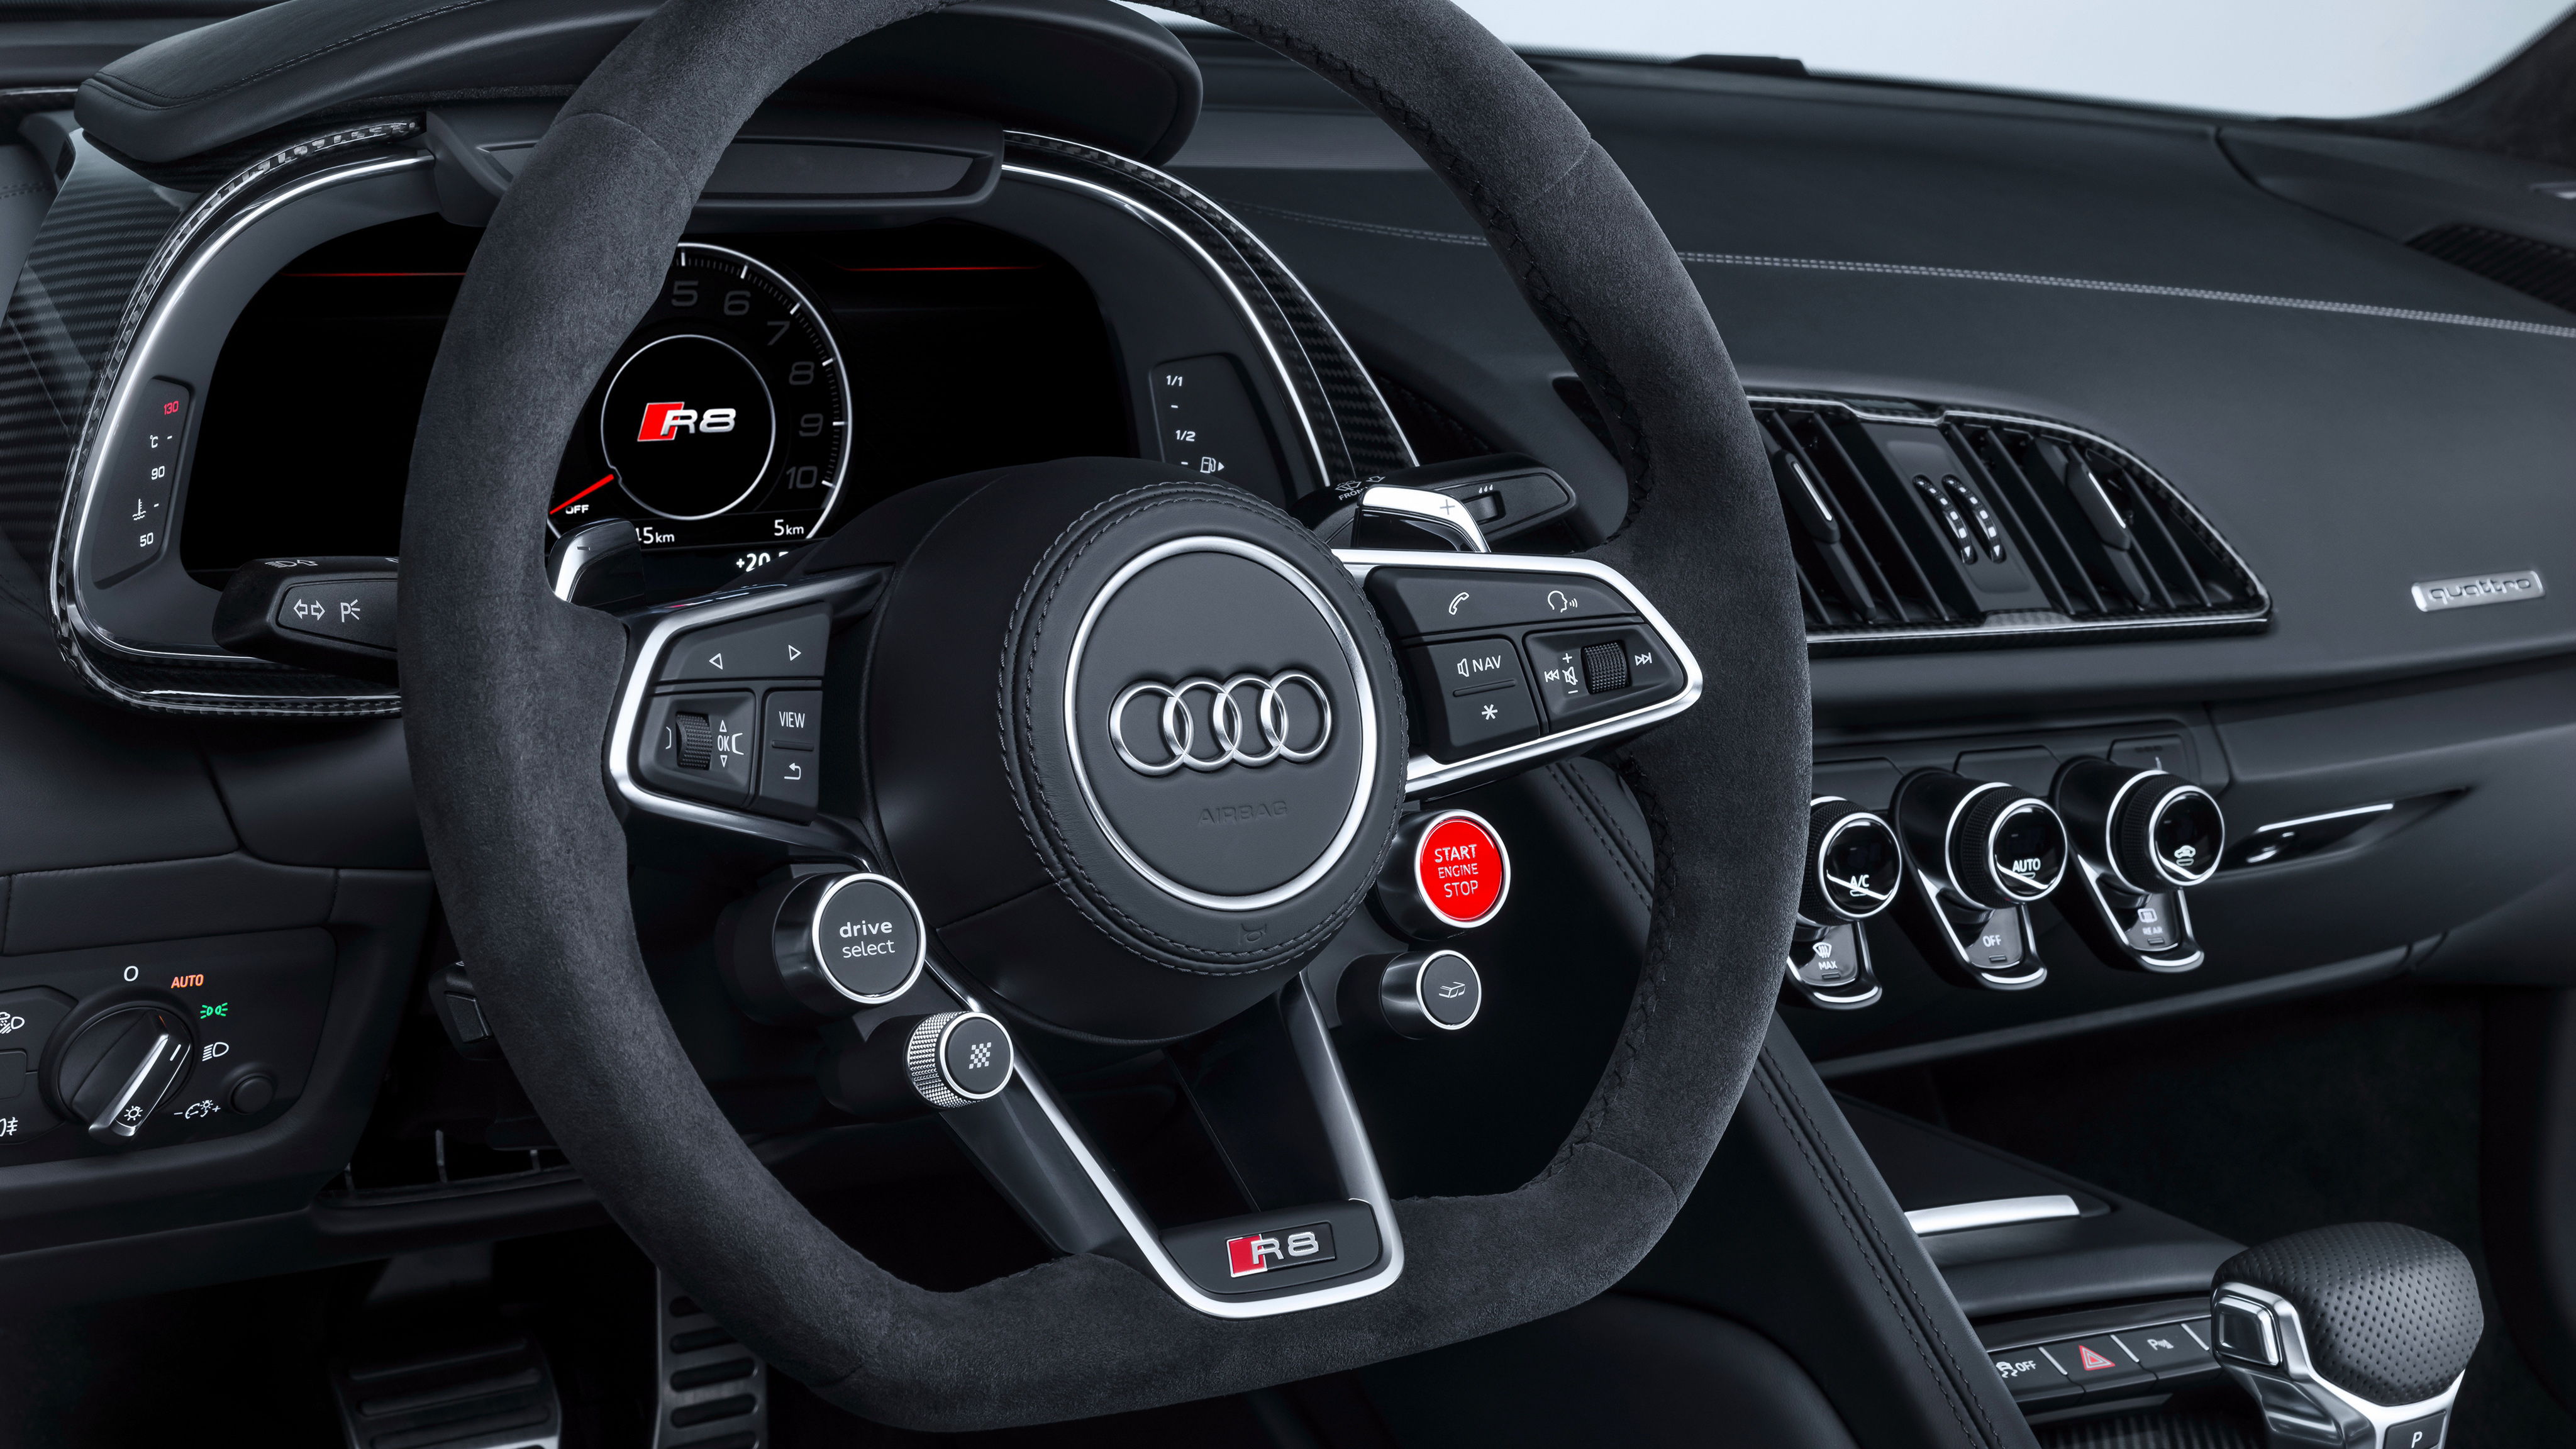 Audi R8 Coupe interior specifications